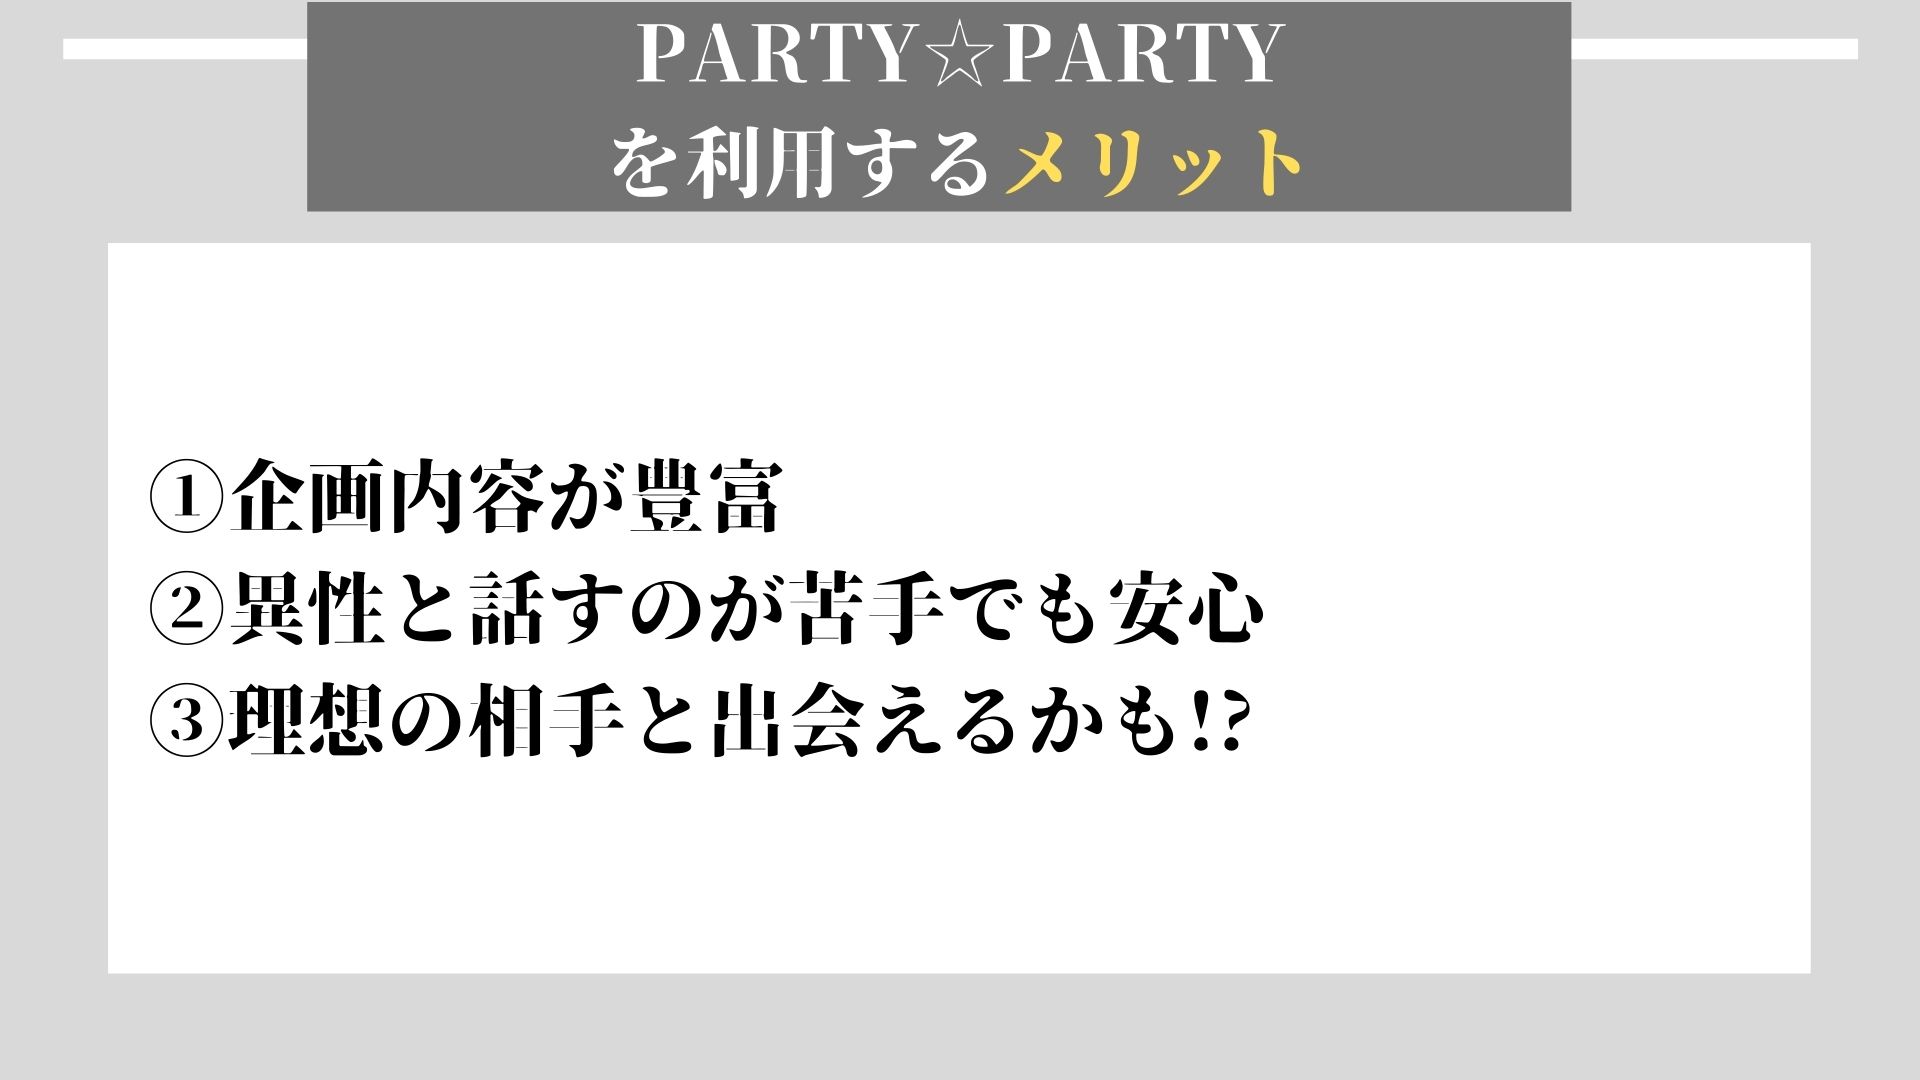 PARTY PARTY メリット